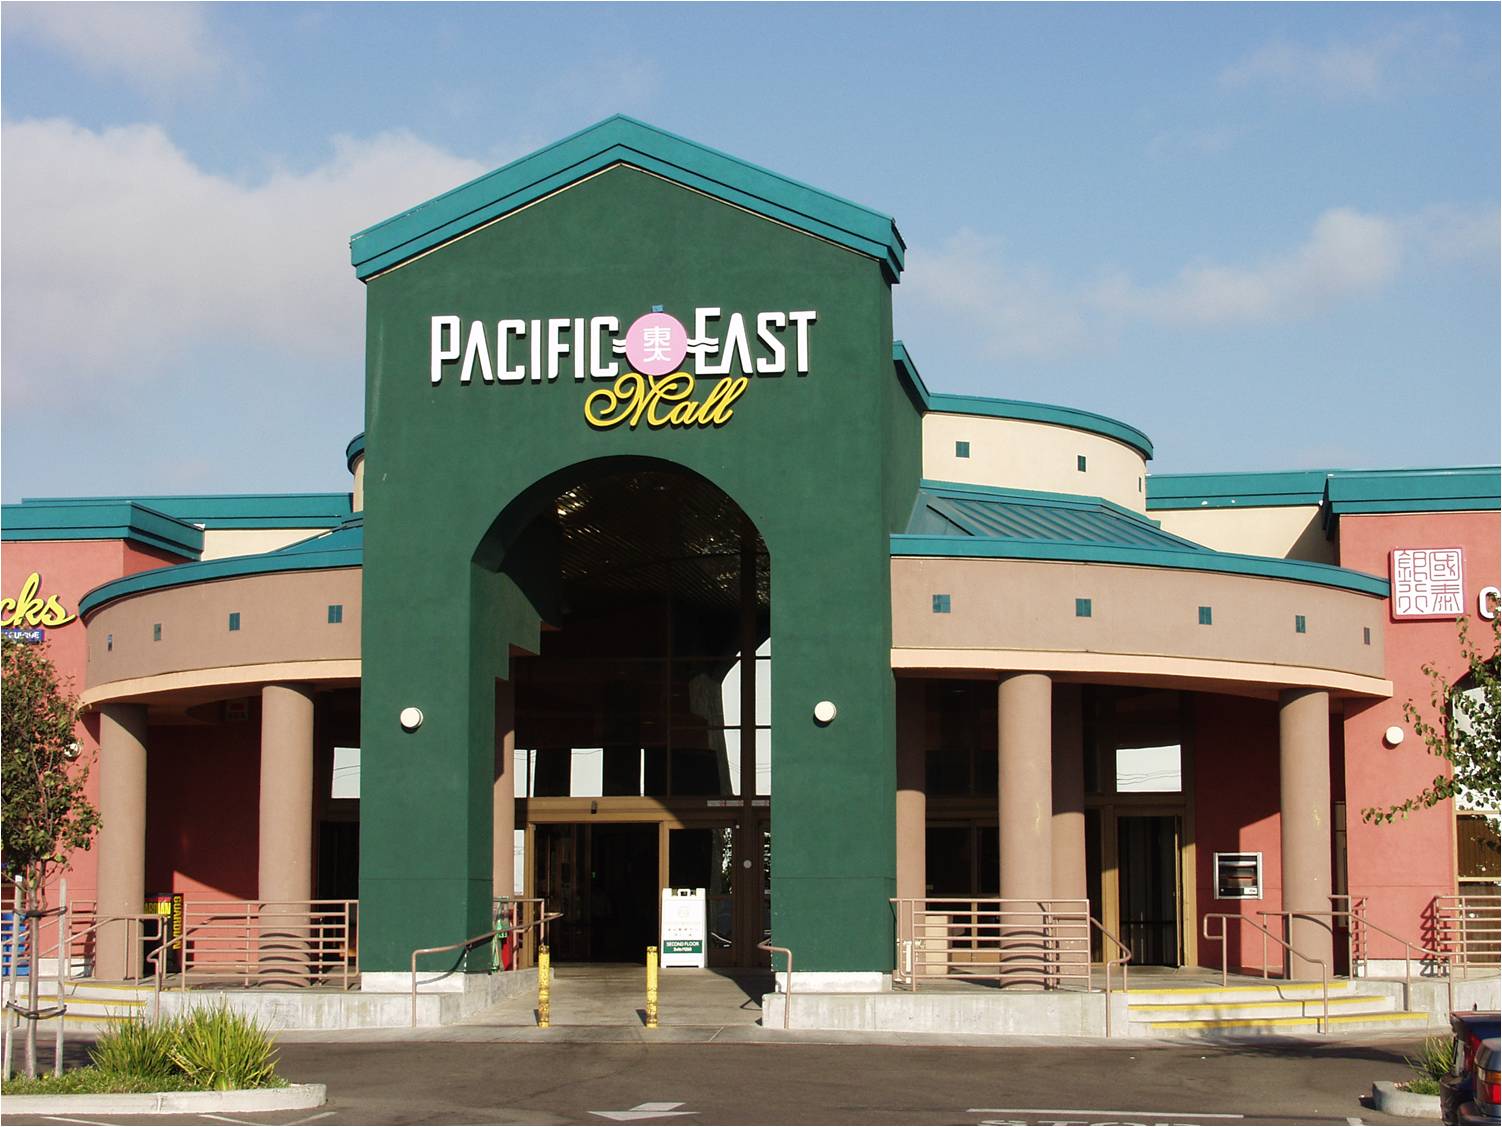 Pacific East2